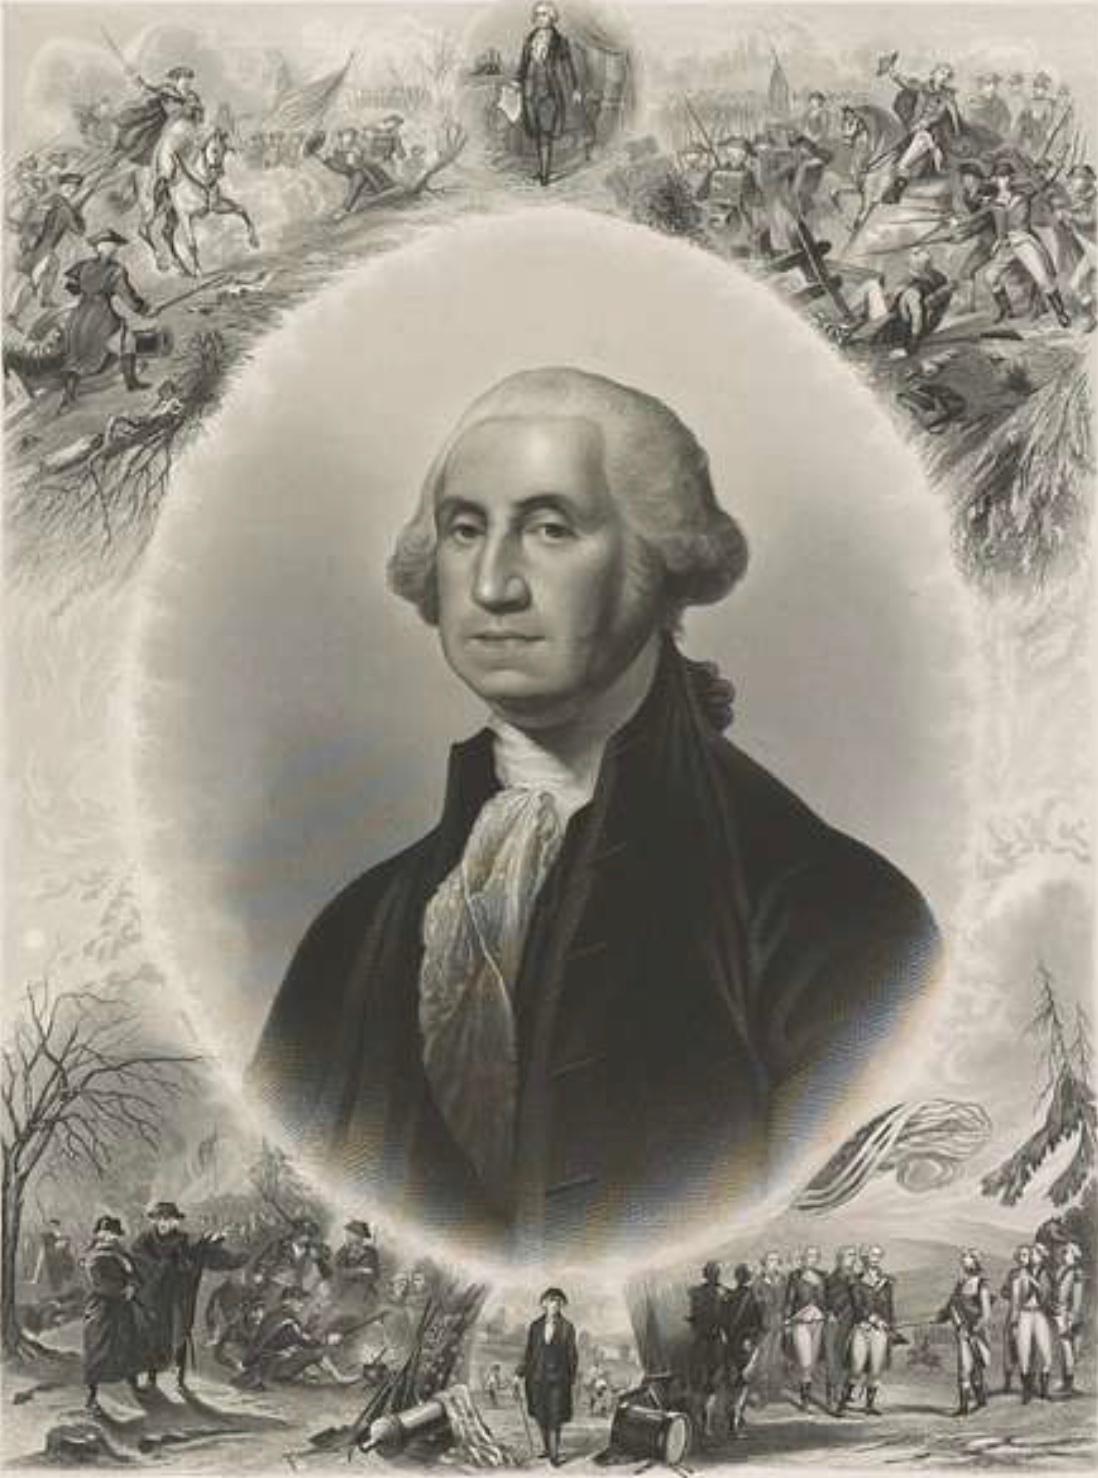 A 19th-century portrait of George Washington by John Chester Buttre. (Library of Congress)